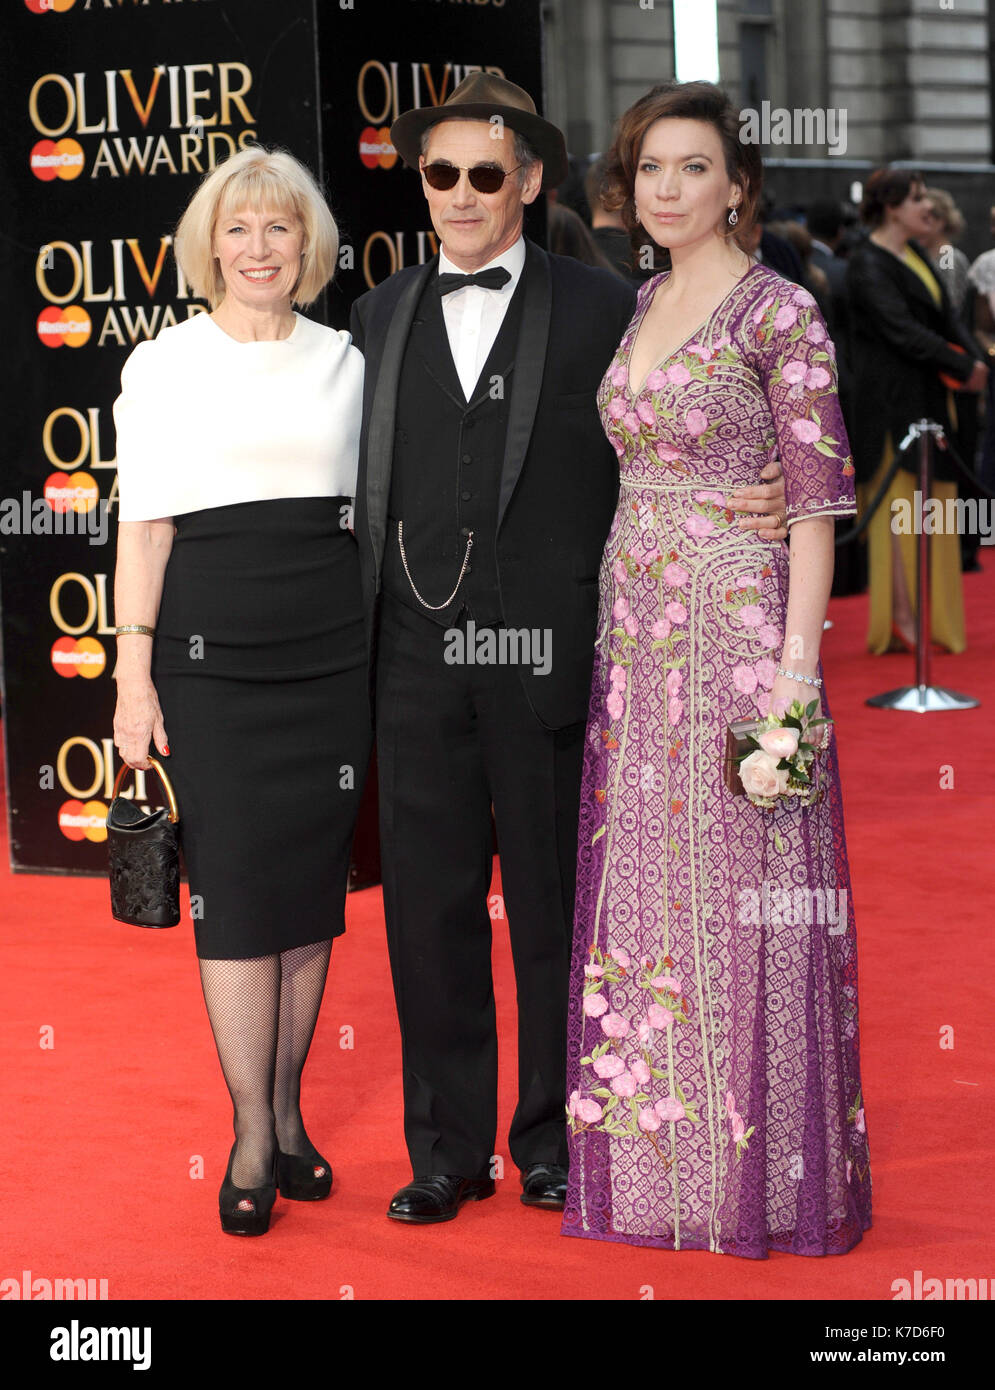 Photo Must Be Credited ©Alpha Press 078237 03/04/2016 Laura Carmichael with wife Claire van Kampen The Olivier Awards 2016 at the Royal Opera House London Stock Photo